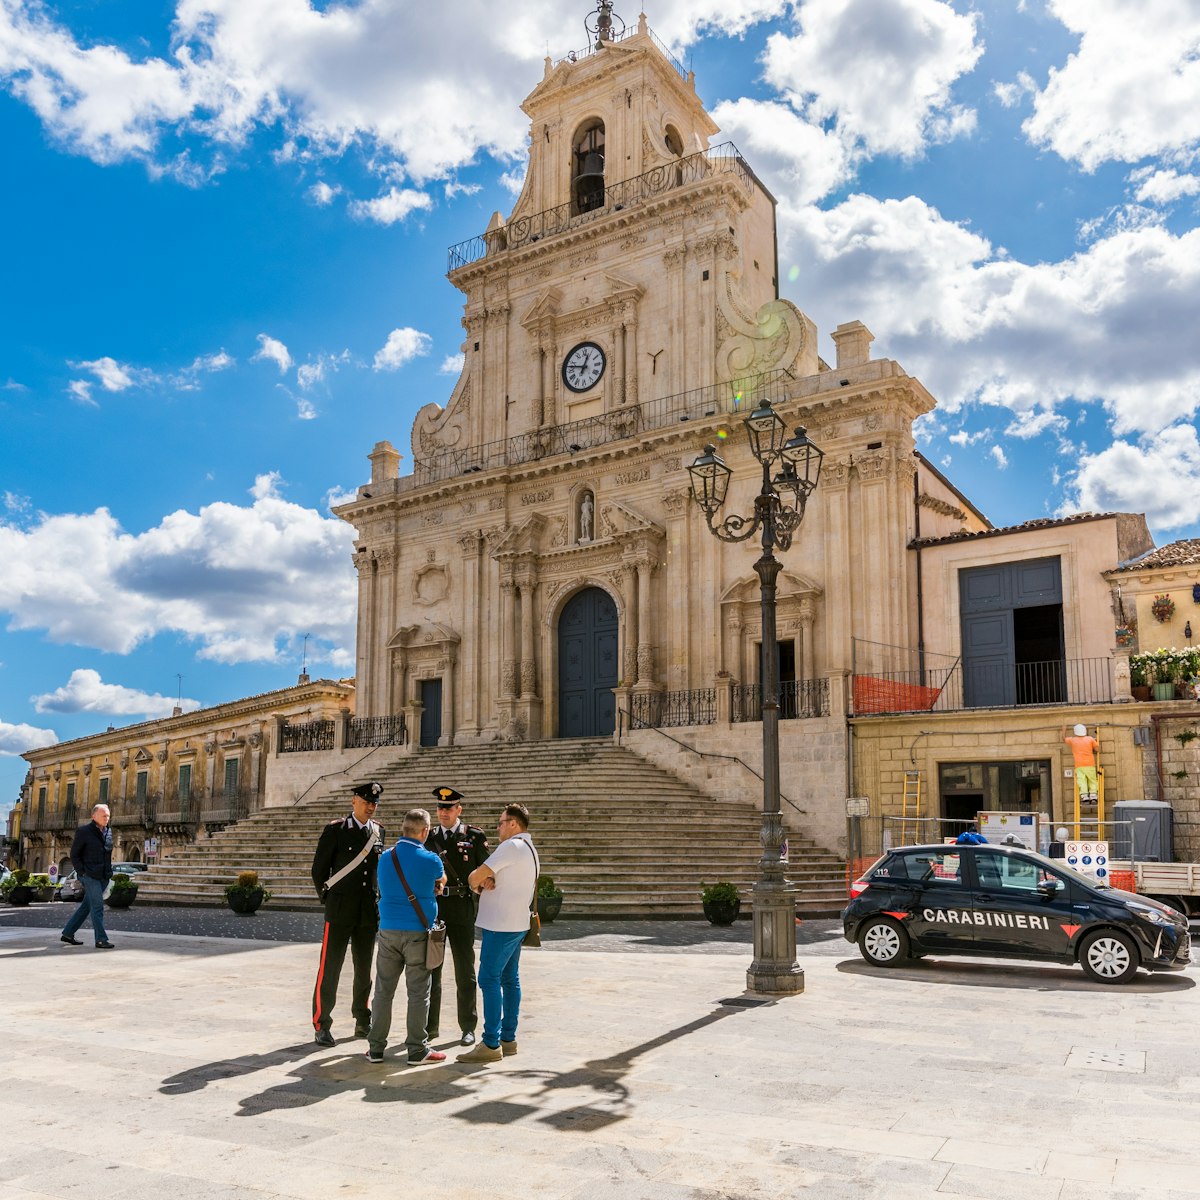 Palazzolo Acreide/ Syracuse Sicily/ Italy - october 04 2019: Two Carabinieri speak and give information to some tourists, on the steps in front of the cathedral of Palazzolo Acreide
1181168446
shops, attraction, baroque, bell tower, building, columns, cops, dome, exterior, flight of steps, heritage, historic, outdoor, police, style, temple, tourists, upright, windows, cars, police man, lamp, palazzolo, clouds, benemerita, square